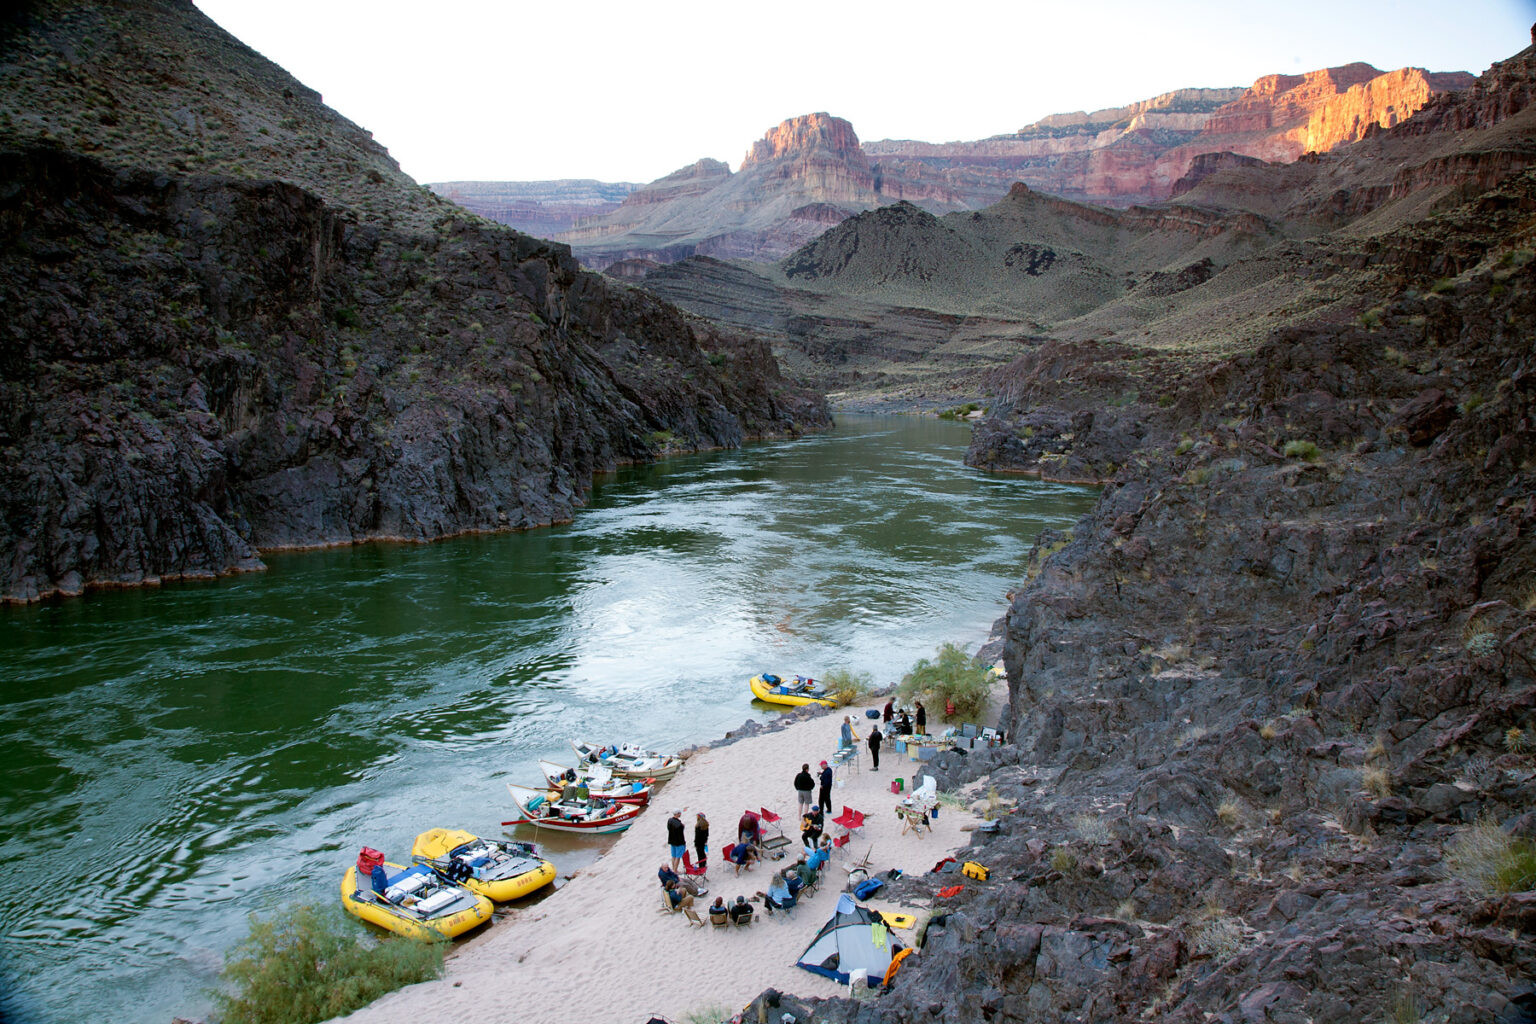 OARS camp from above in Grand Canyon showing moored boats, chair circle, kitchen and tents at sunset